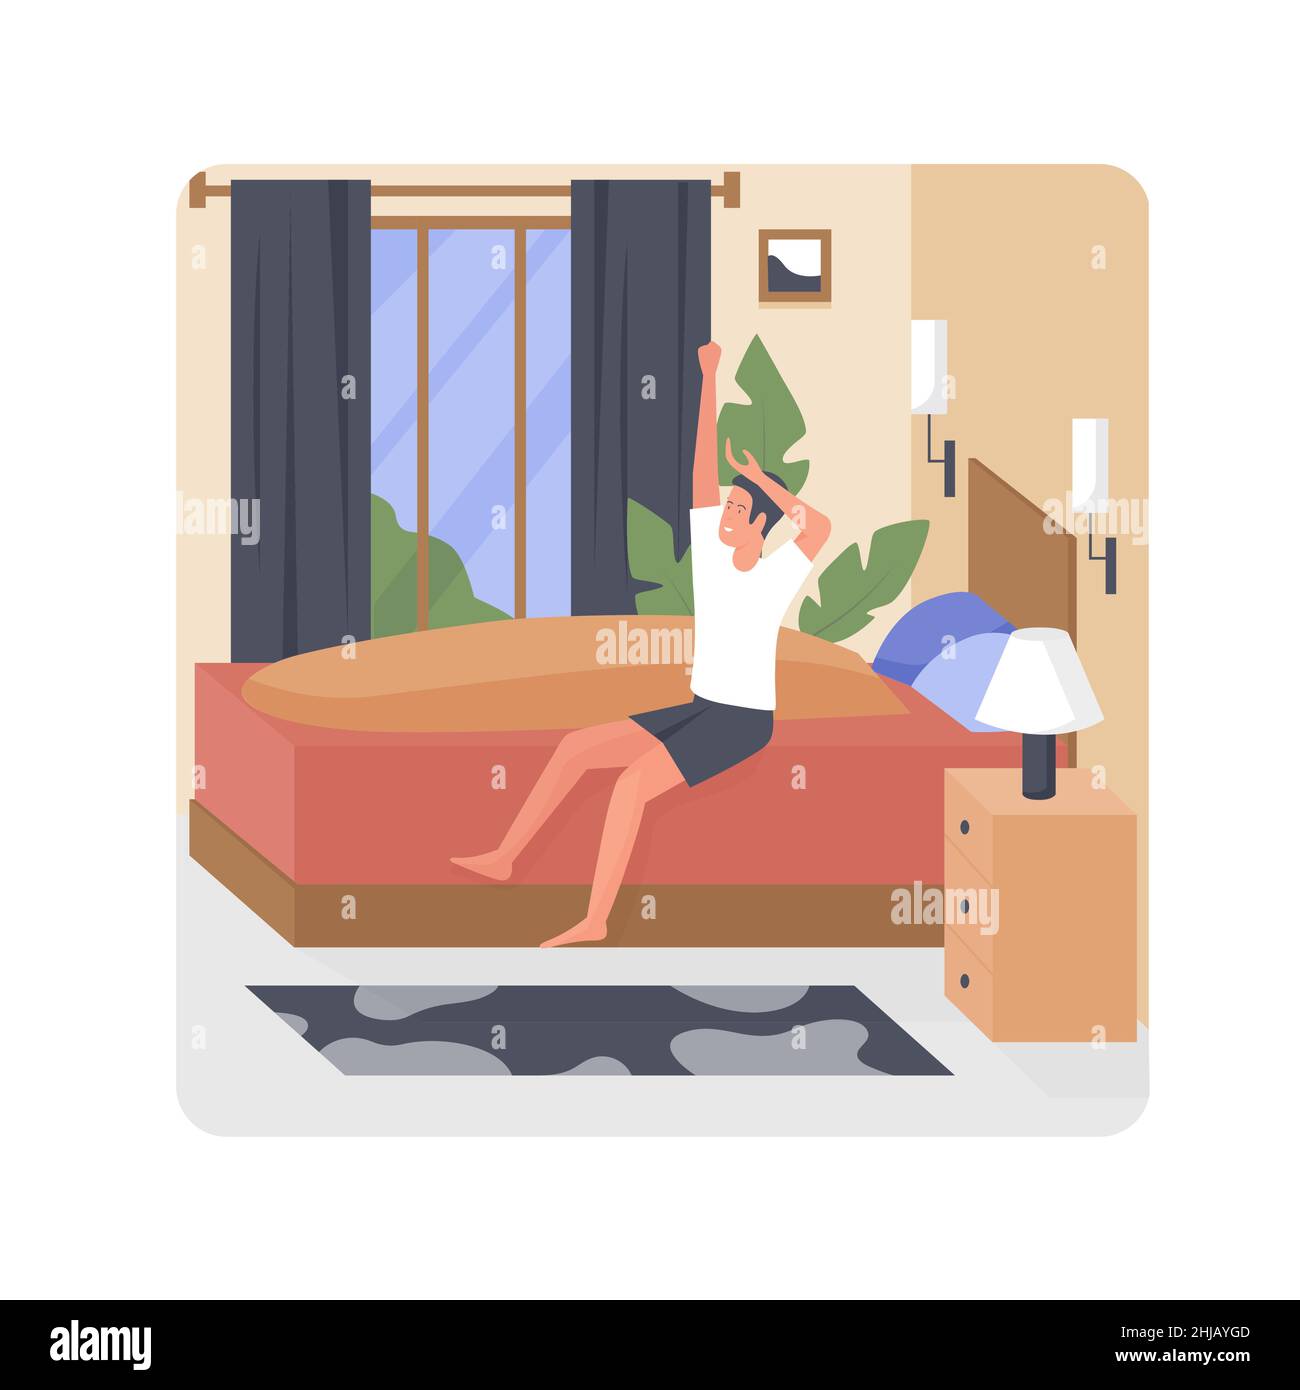 Sleepy boy getting up in his cozy bedroom. Morning waking up routine and day beginning cartoon vector illustration Stock Vector